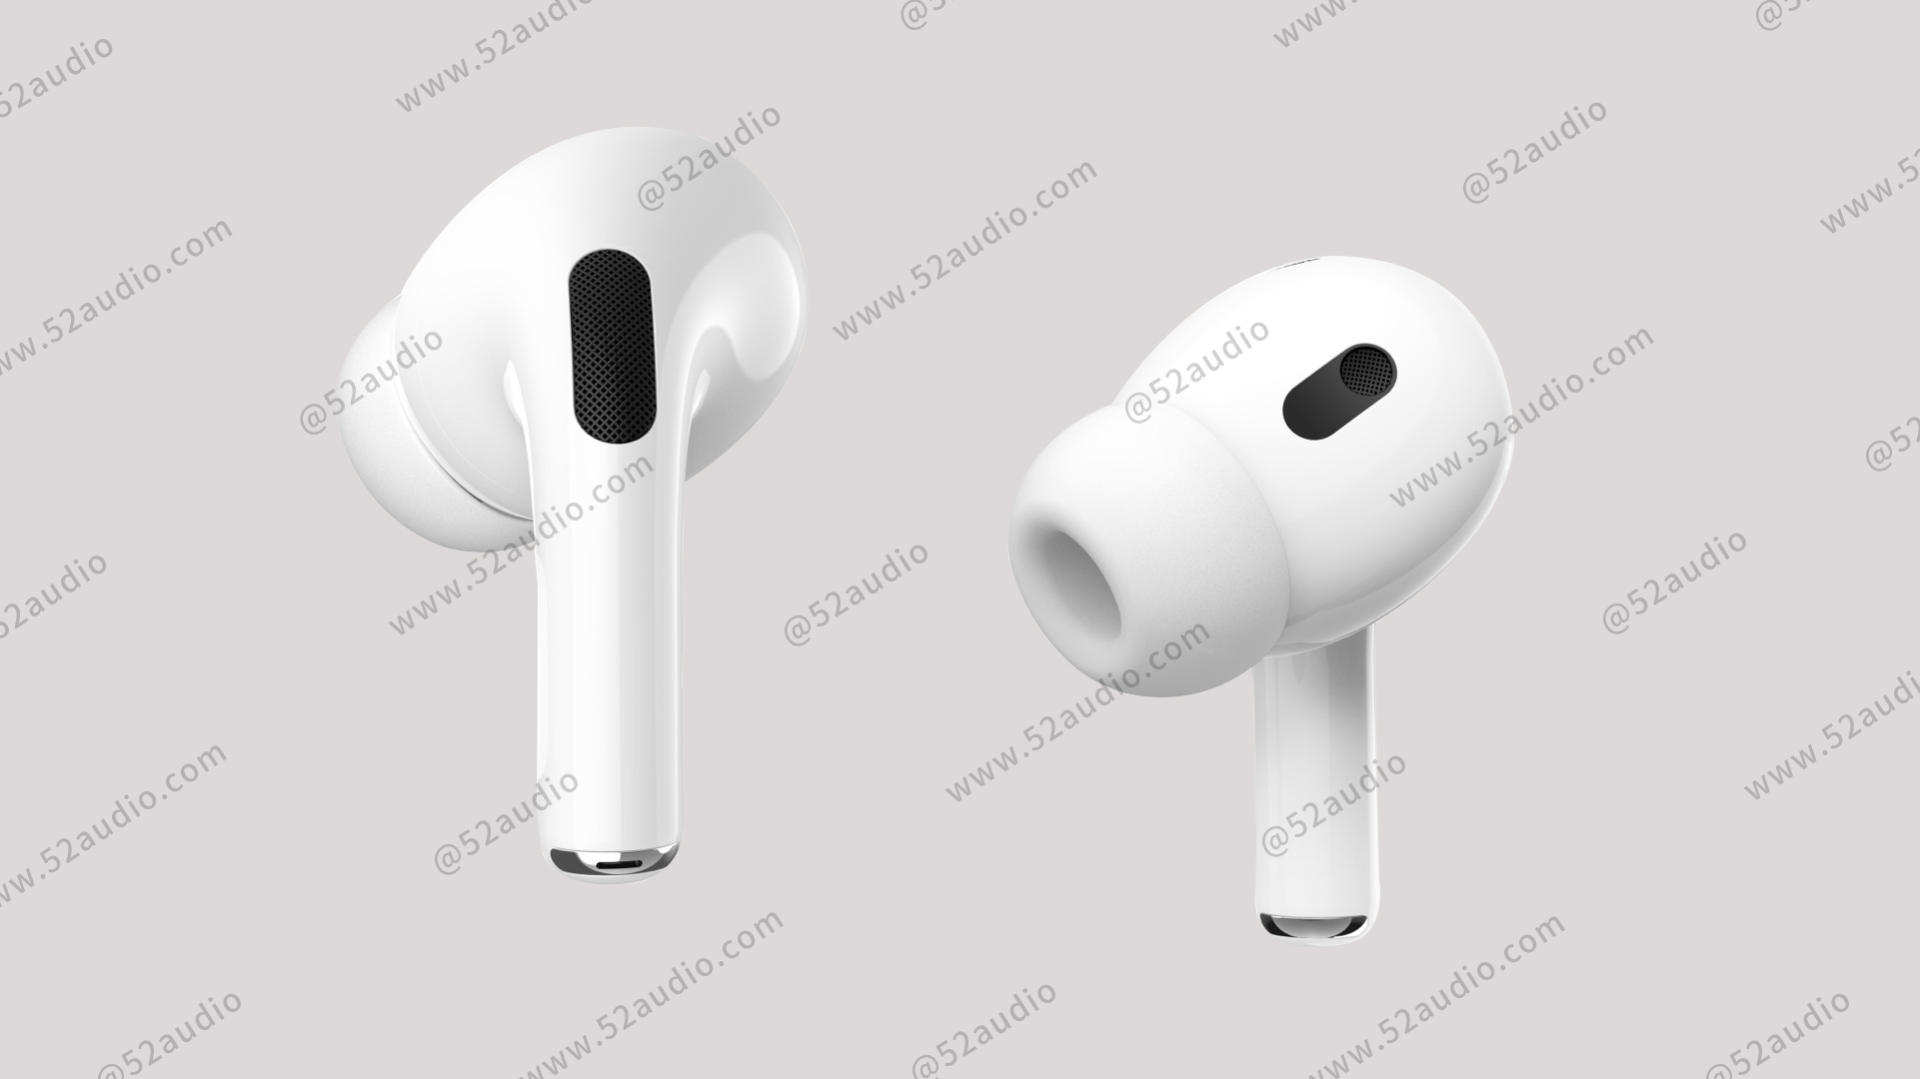 Should you buy AirPods Pro now or wait for AirPods Pro 2?